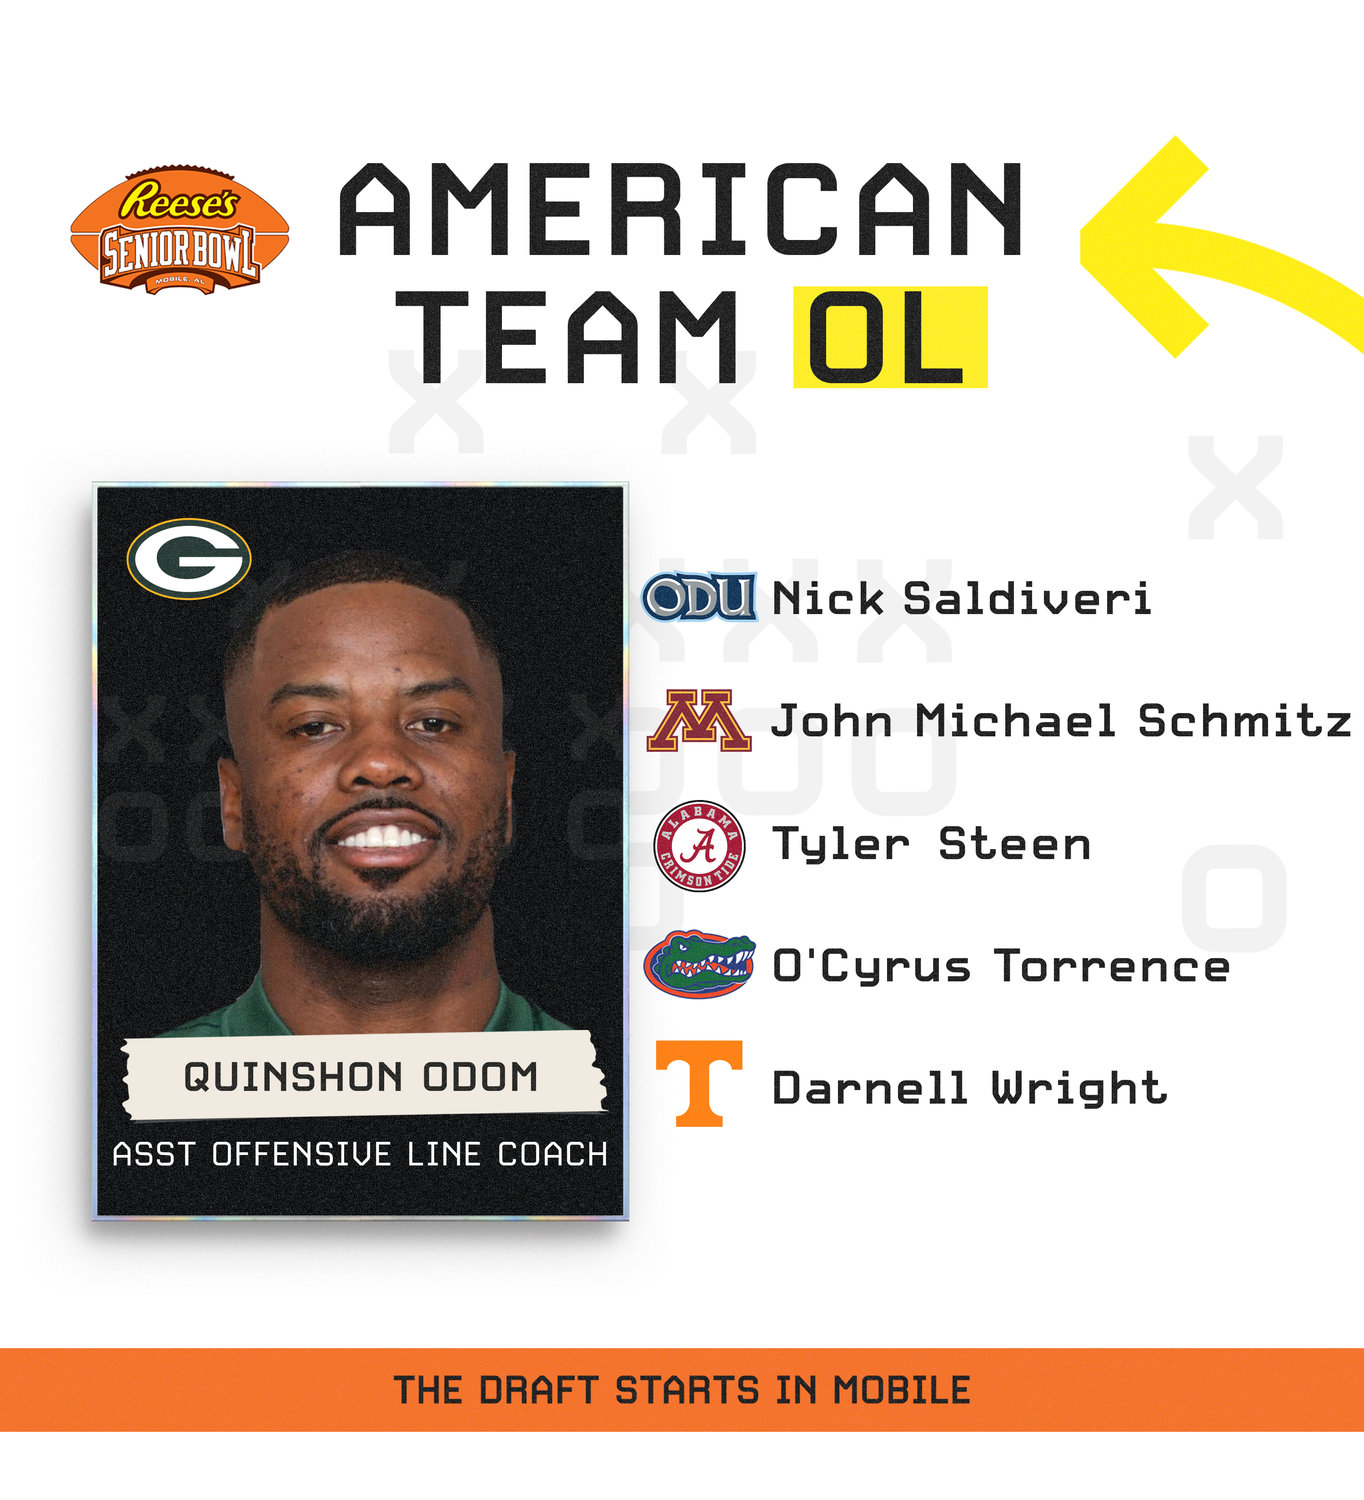 Green Bay Packers coaching assistant Quinshon Odom got the nod to serve as assistant offensive line coach for the American Team for the Senior Bowl, the longest continually running college football senior all-star game. This year marks the first time in the Senior Bowl’s rich history that two full staffs from NFL clubs will not be coaching the game.